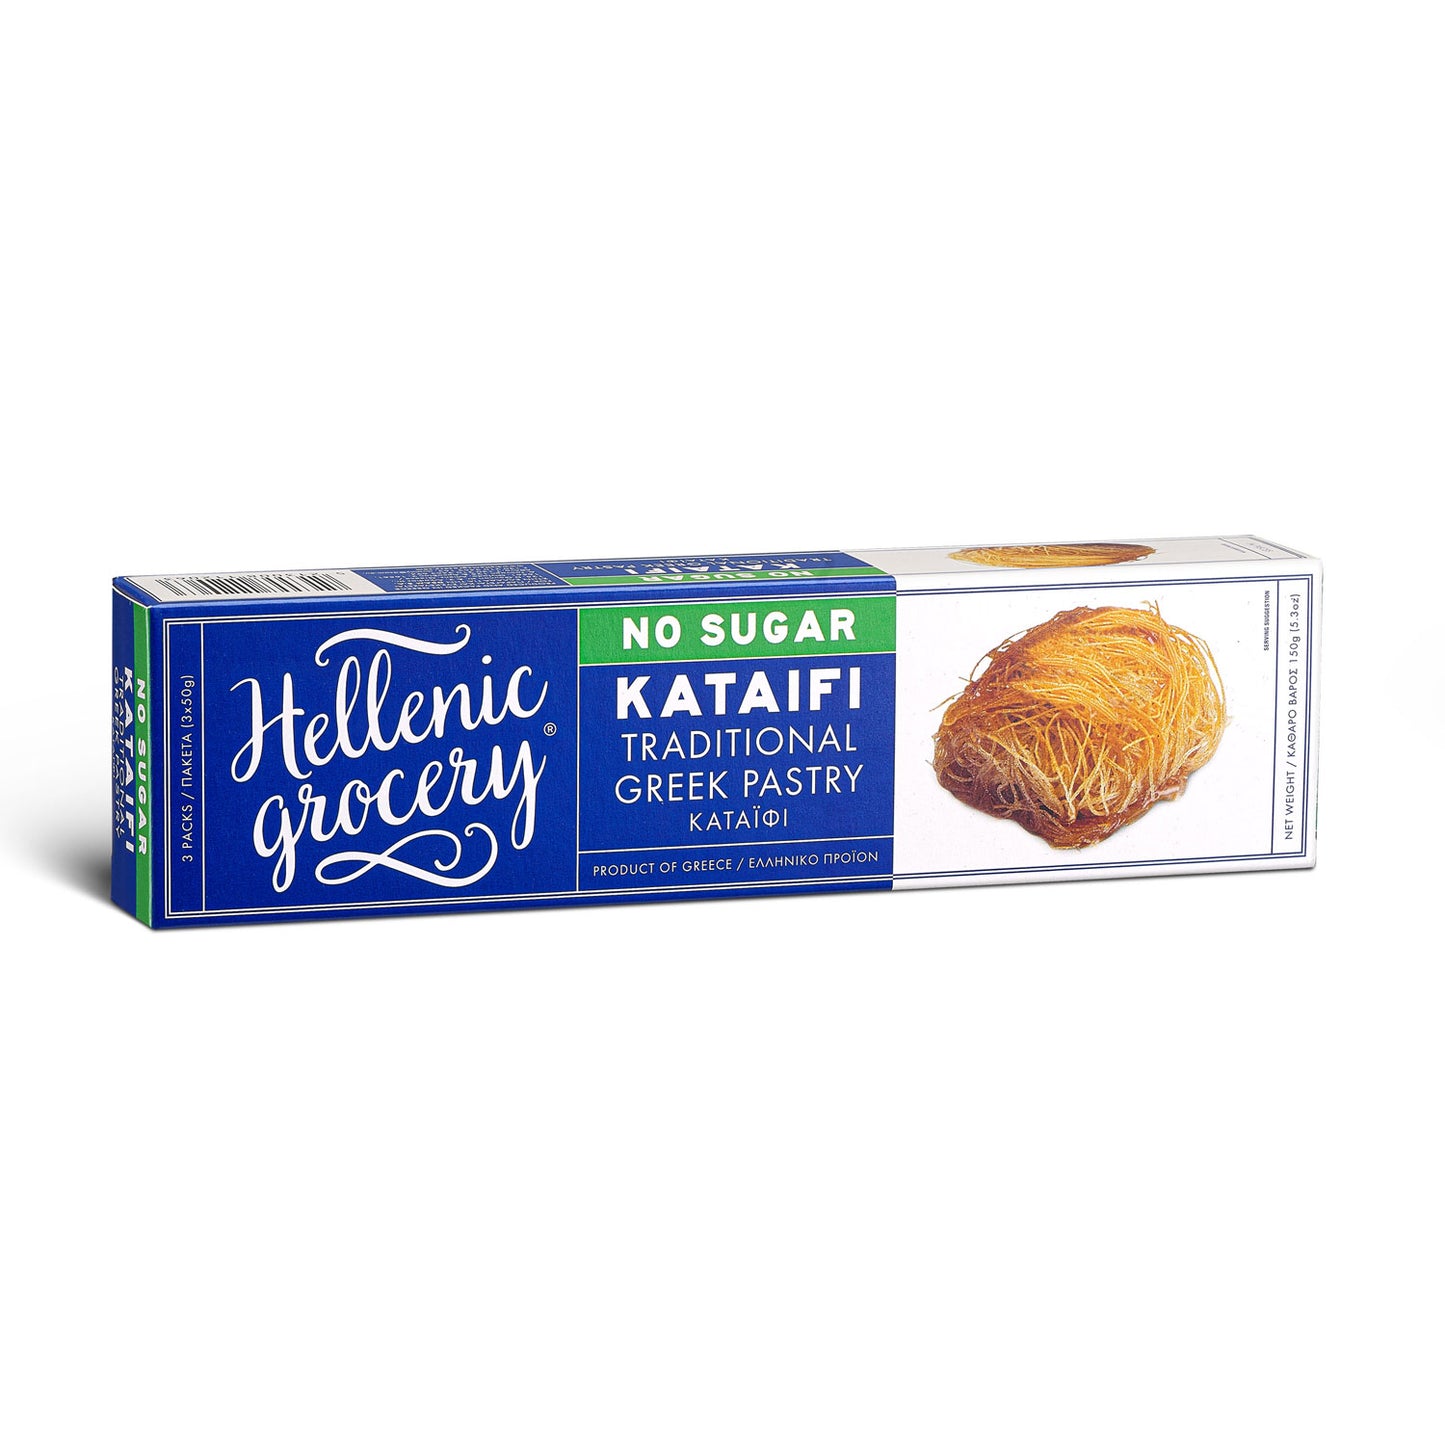 Sugar Free Traditional Kataifi Pastry - 180g - Hellenic Grocery